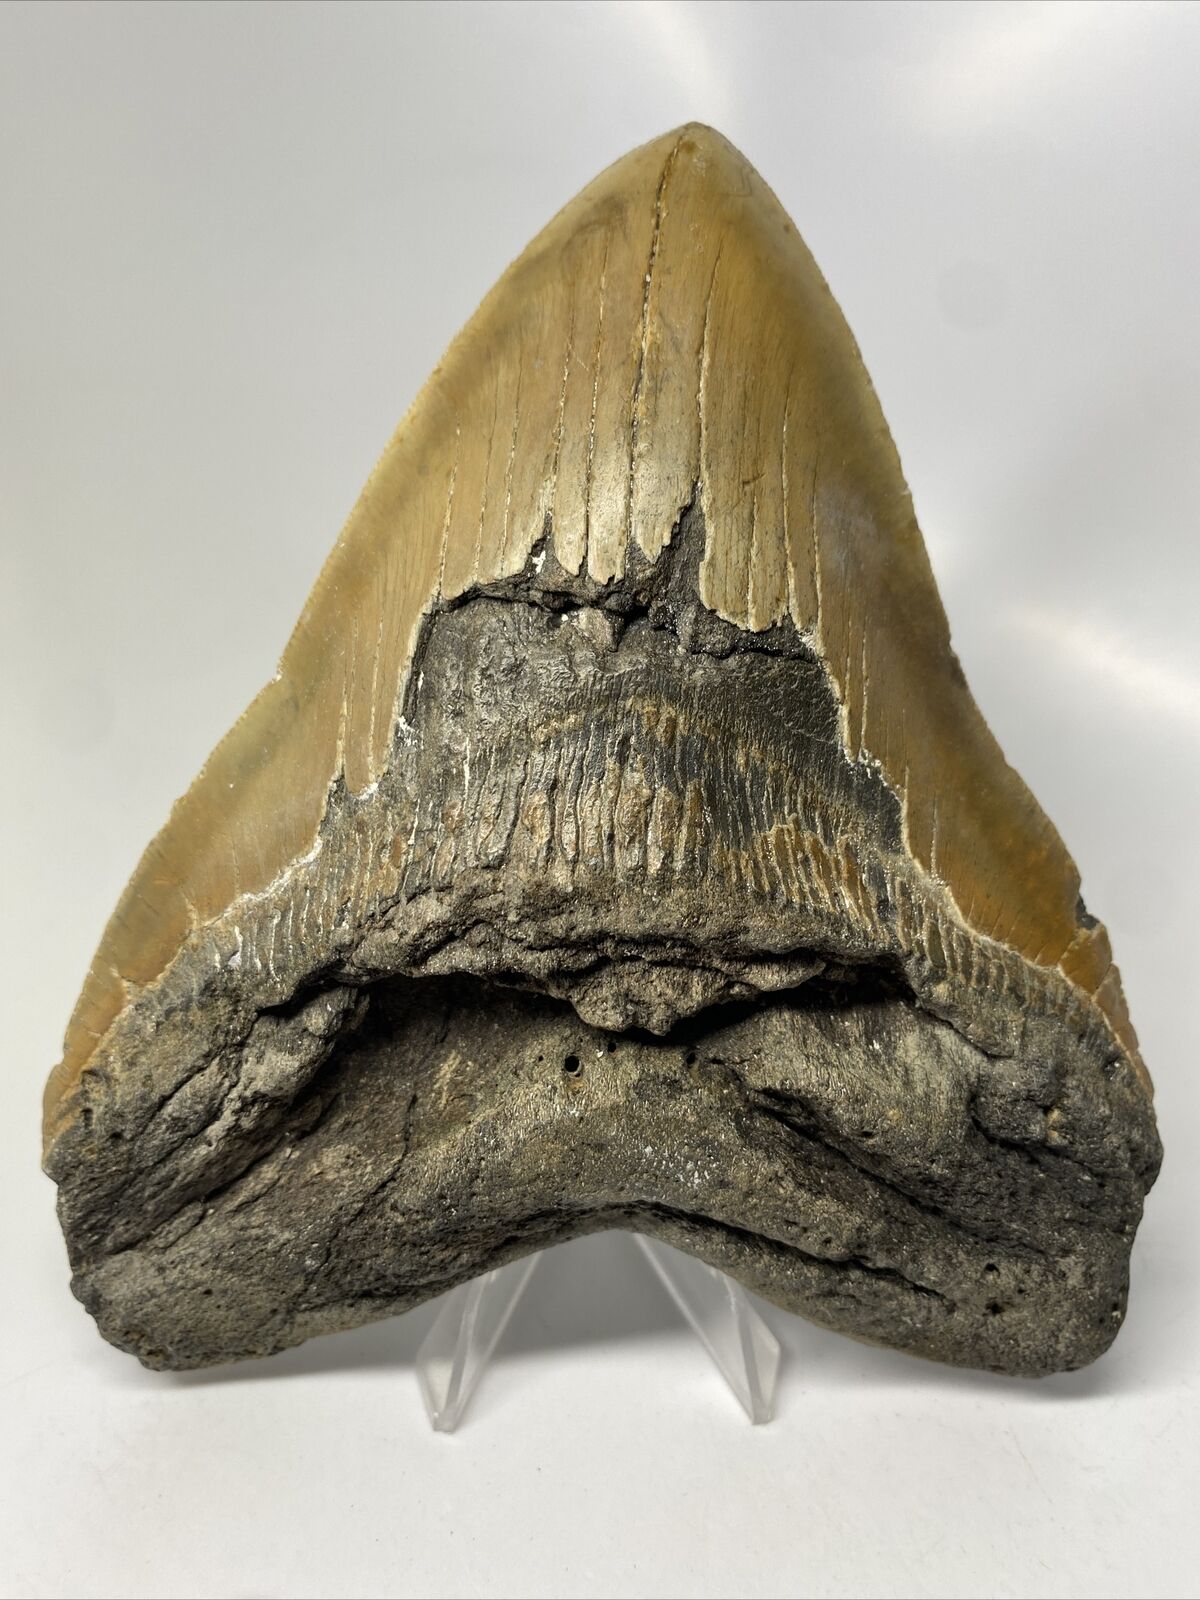 Megalodon Shark Tooth 6.17” Monster - 5” Wide - Authentic Fossil 13643